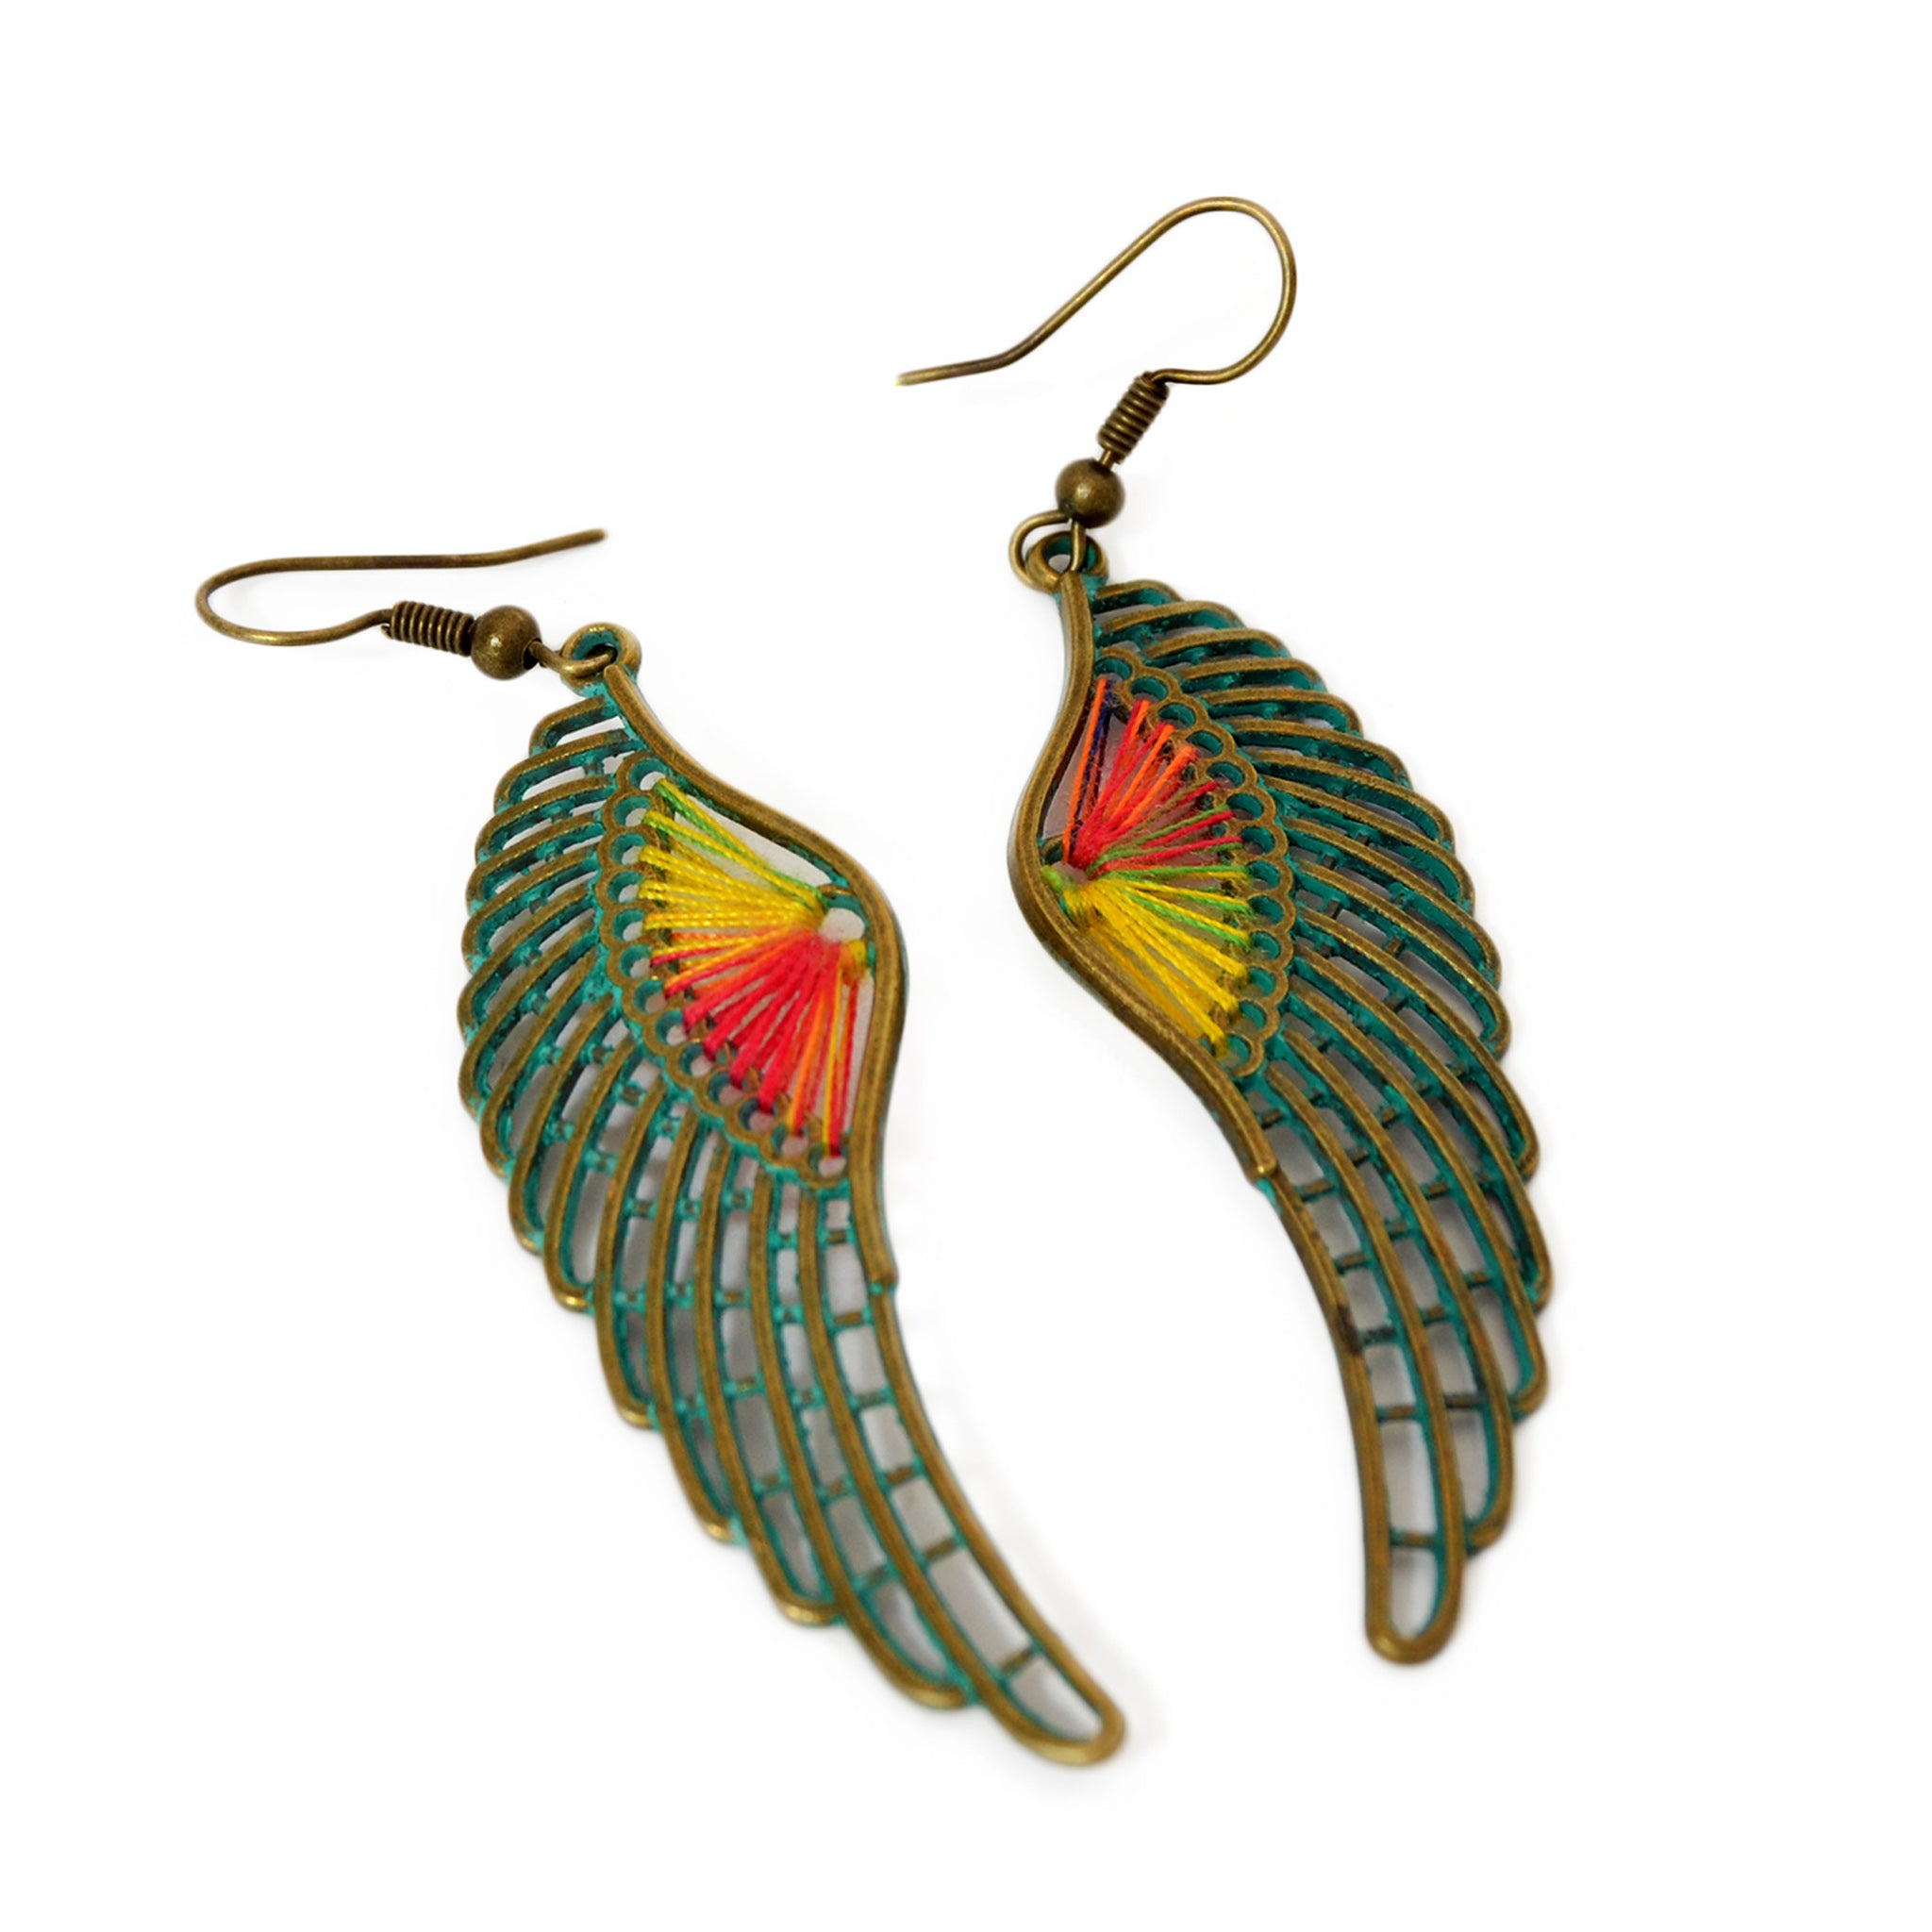 Wing earrings with colored threads and old green patina on brass